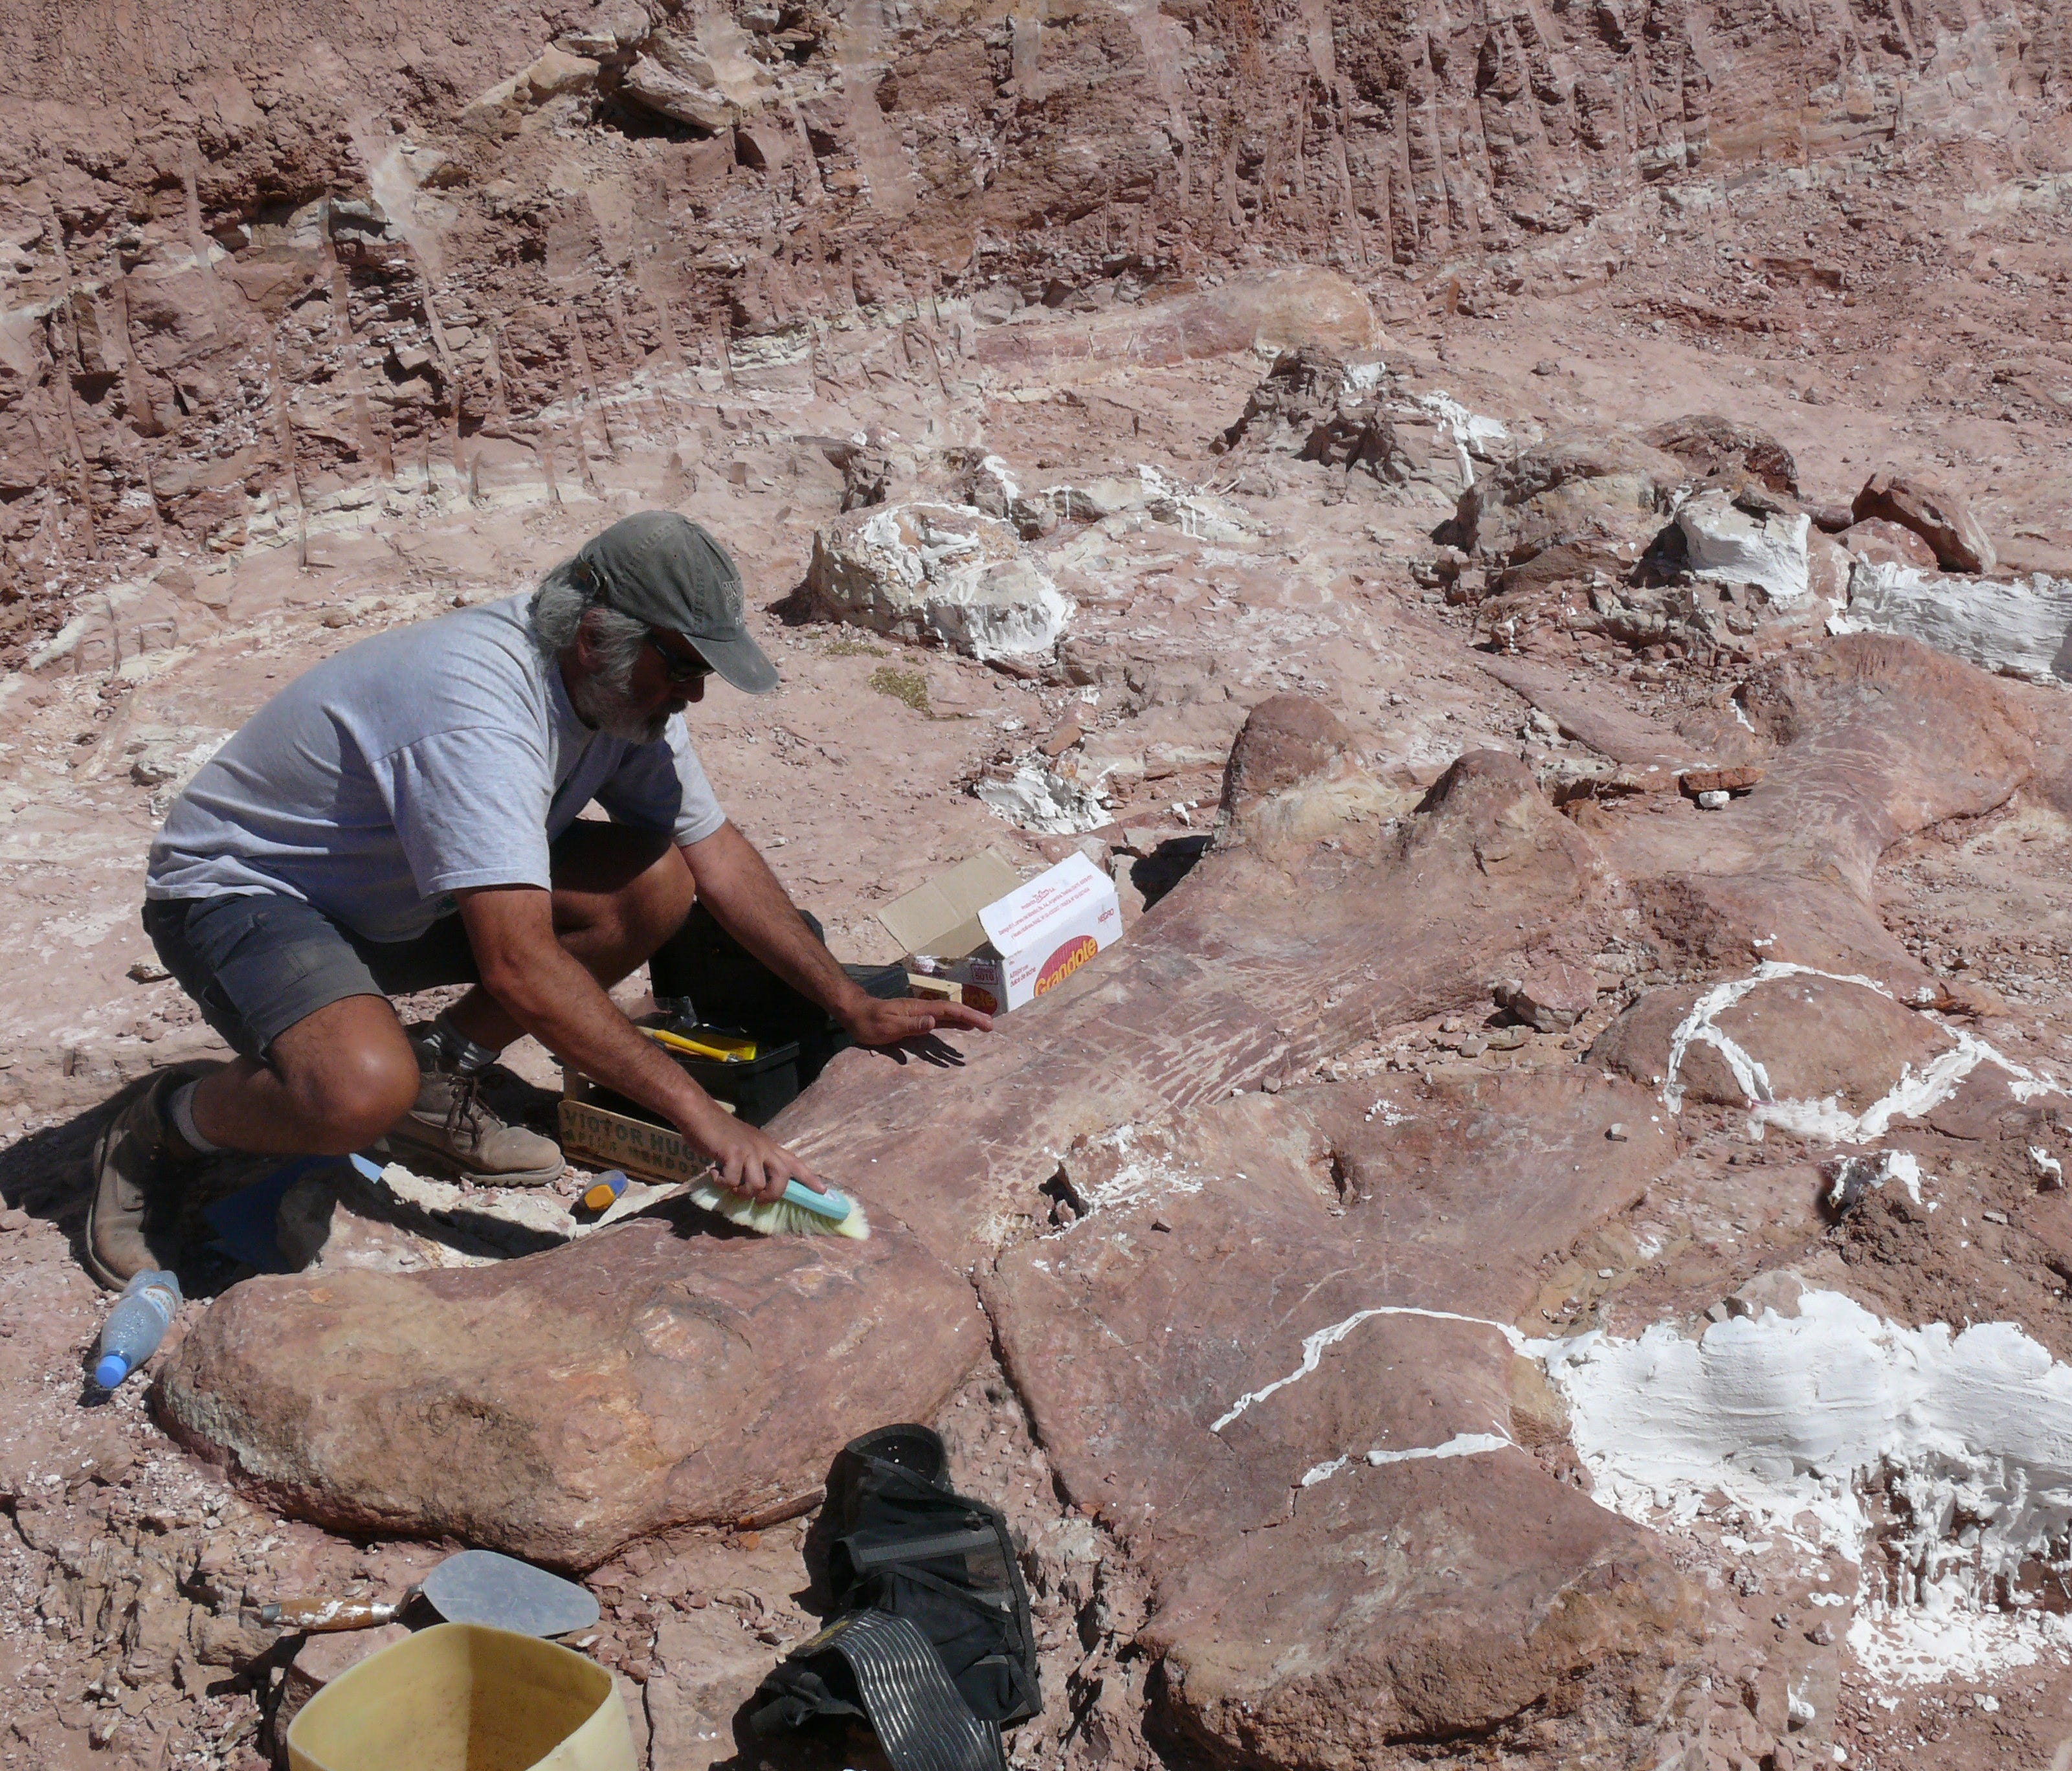 Excavation of Patagotitan fossils on the La Flecha ranch in Patagonia, Argentina. It took 18 months to excavate the 150 bones, which come from at least six different animals.